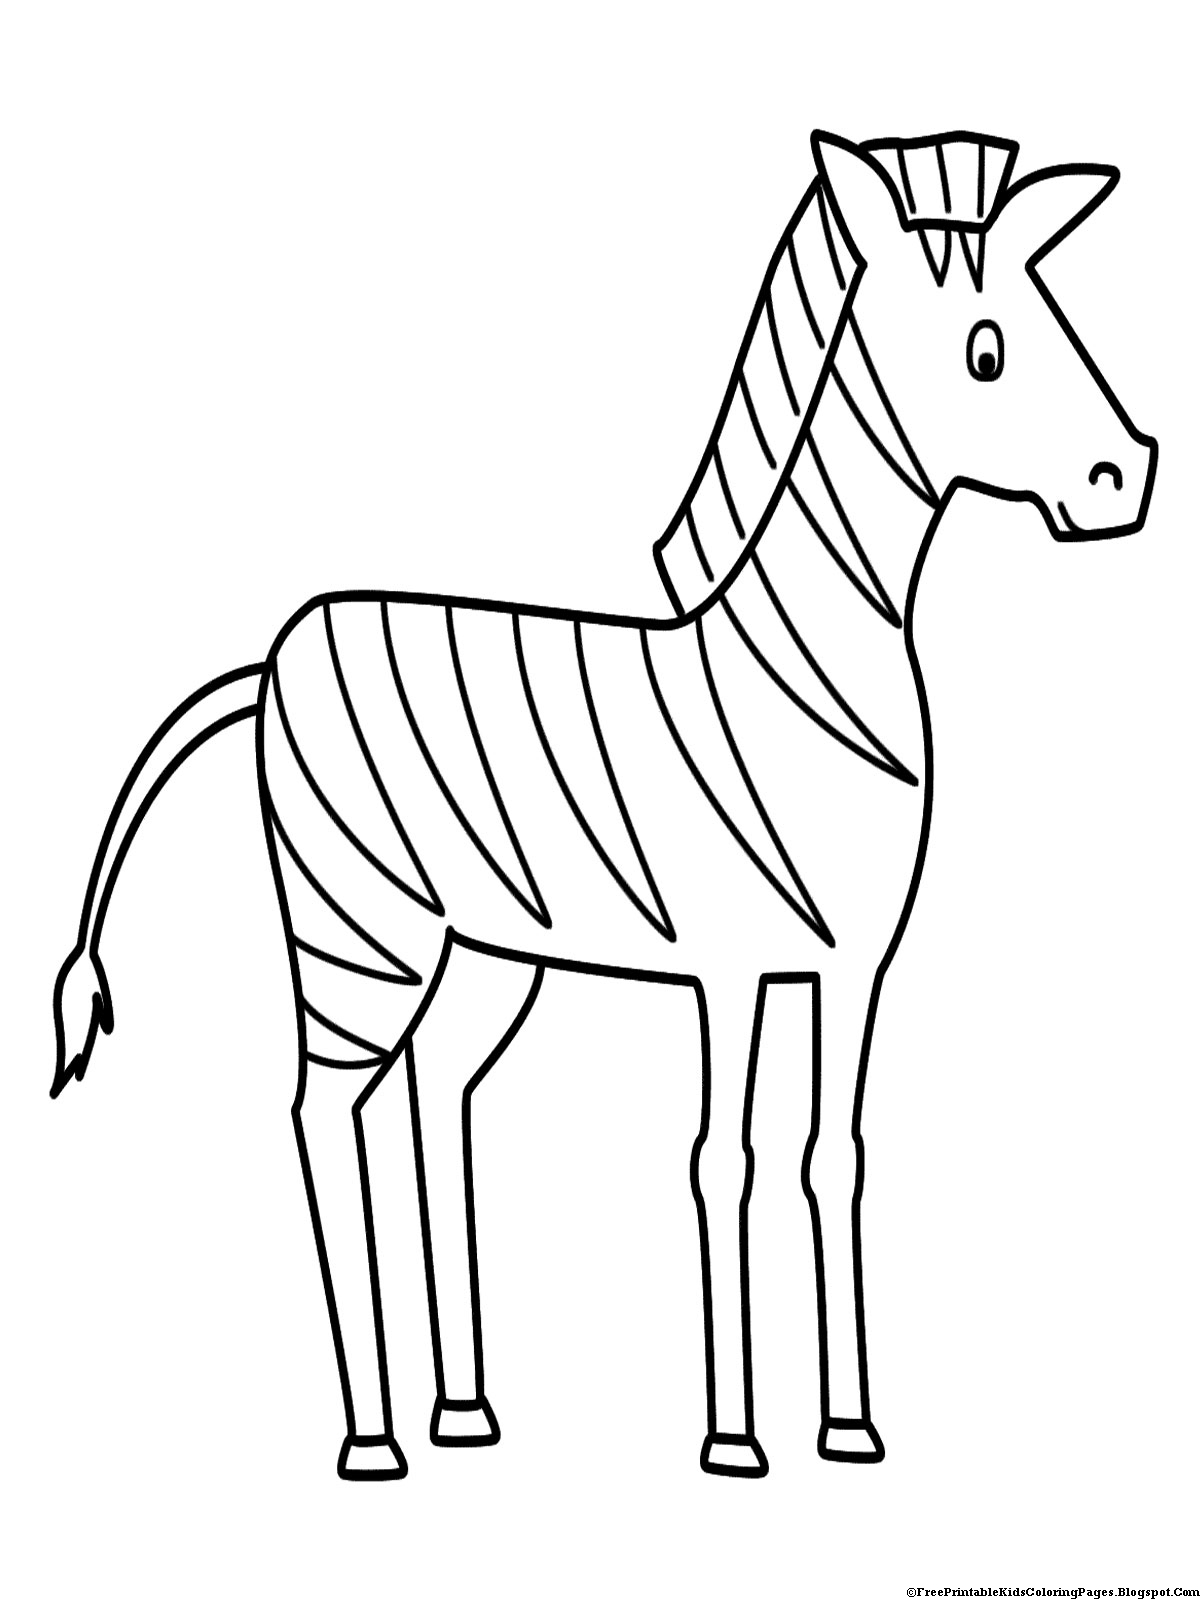 Download Zebra #24 (Animals) - Printable coloring pages